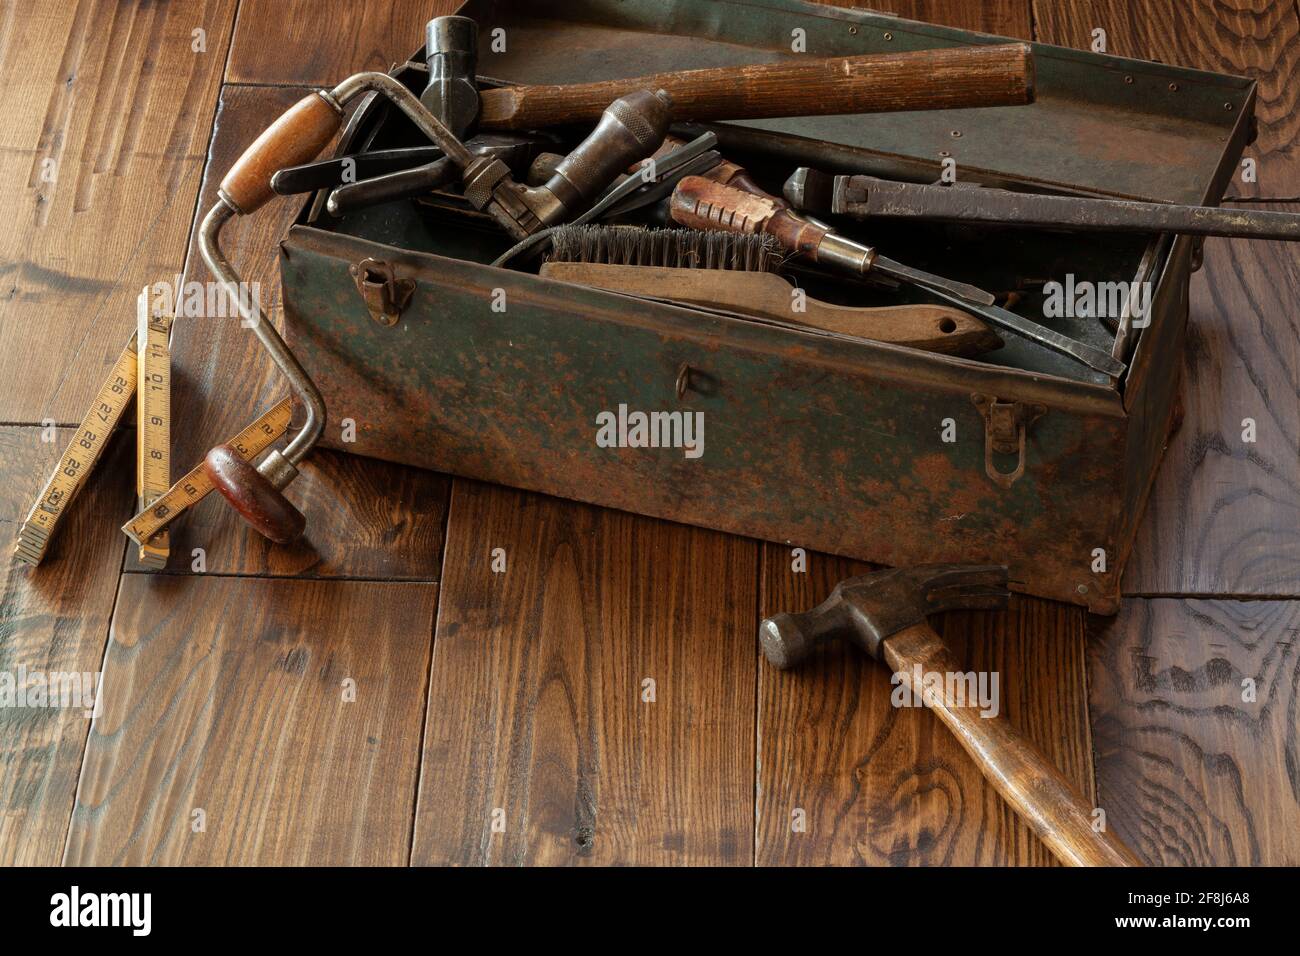 Antique tools and grungy toolbox on dark rough wood surface Stock Photo